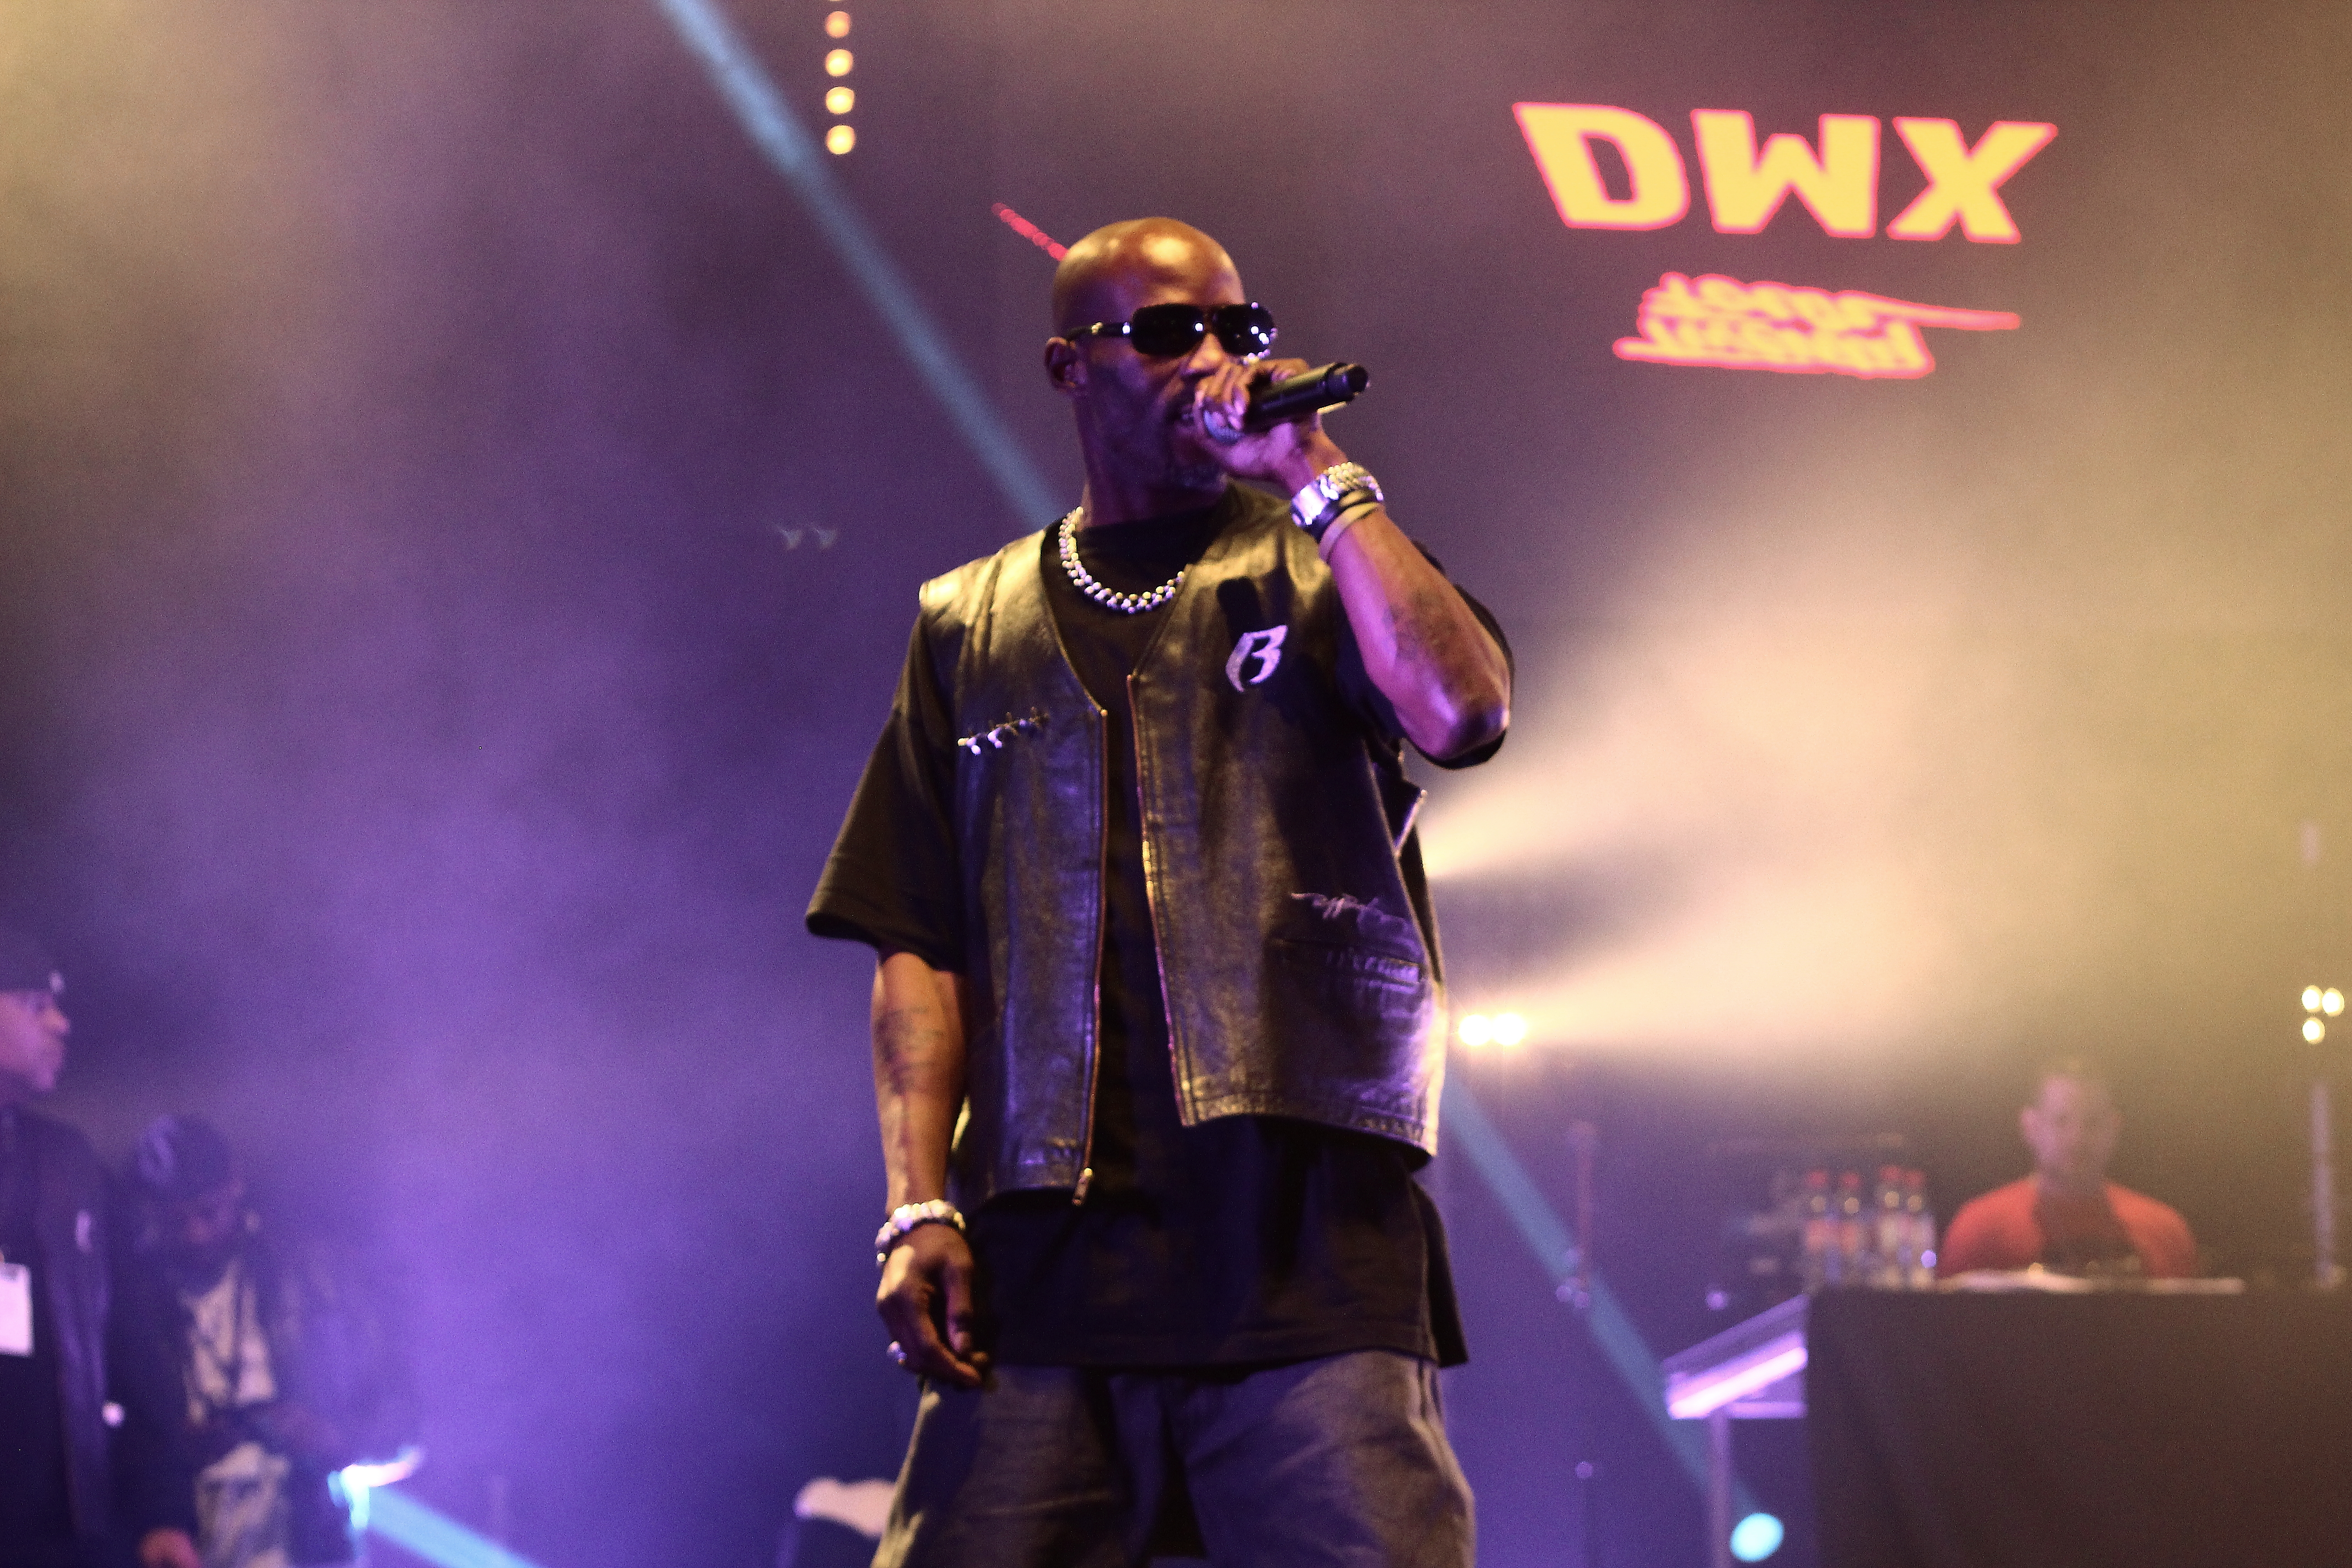 40 Motivational DMX Quotes To Inspire You